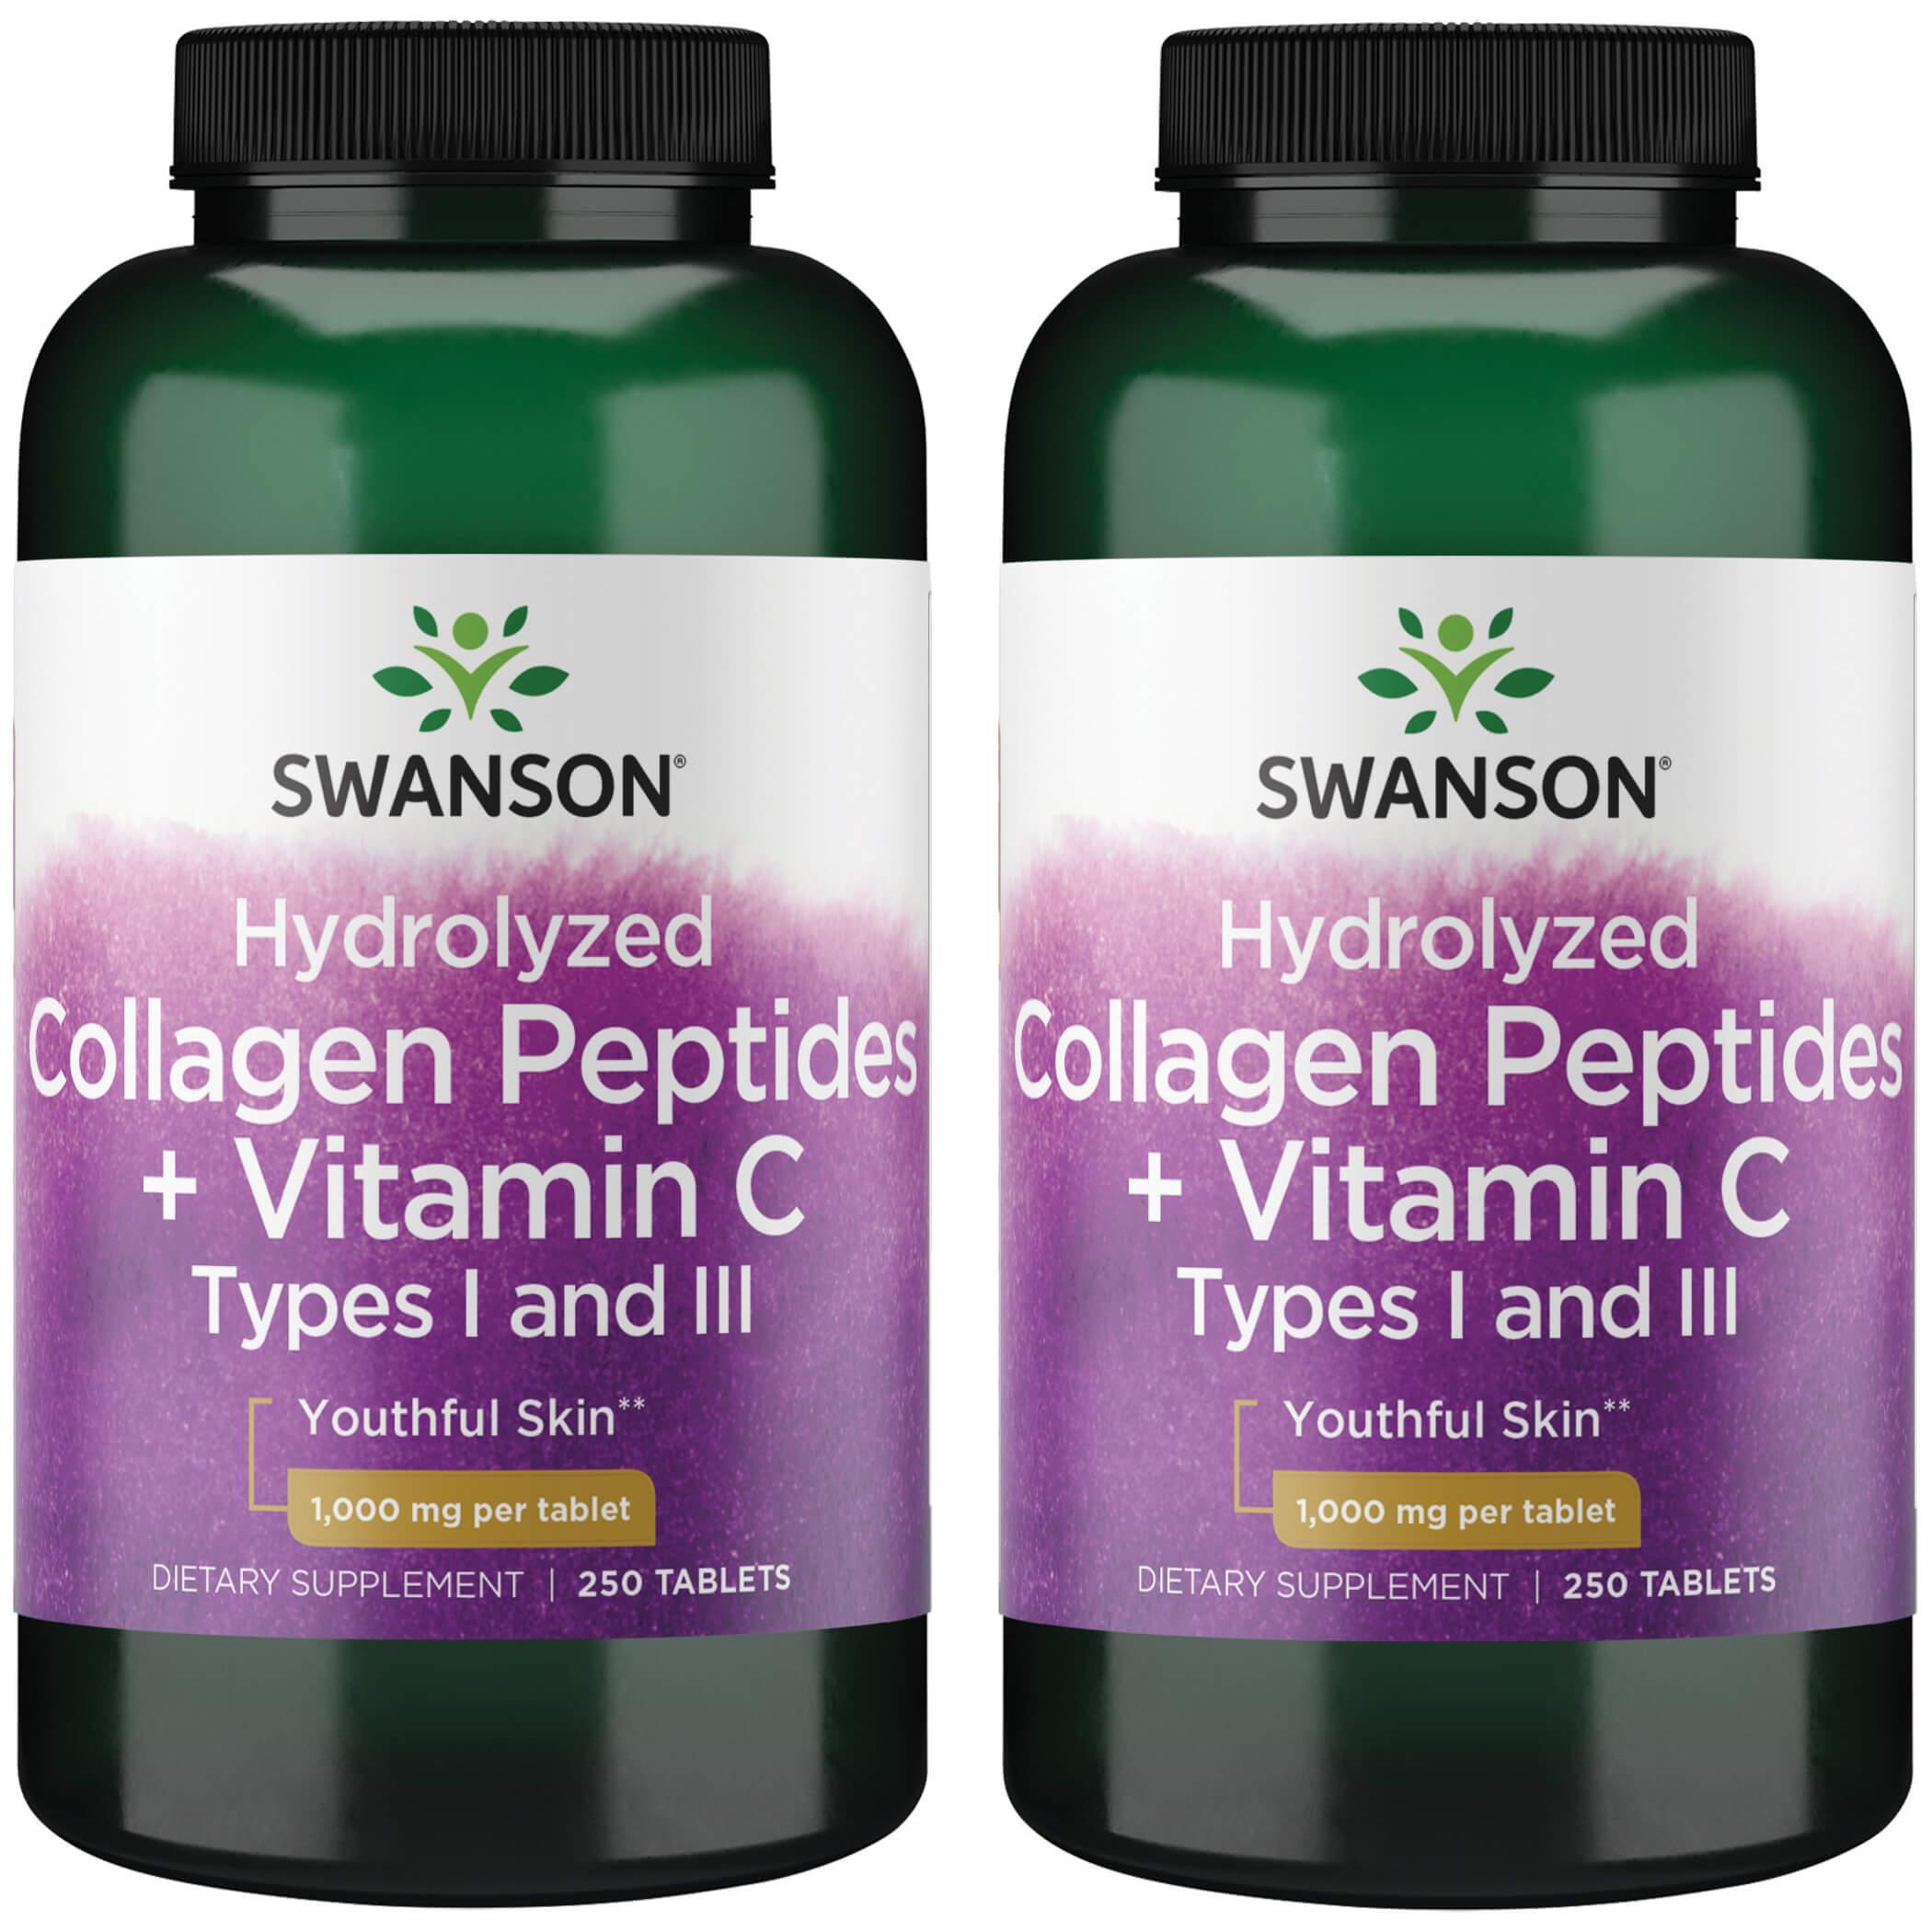 Swanson Premium Hydrolyzed Collagen Peptides + Vitamin C Types I and Iii 2 Pack 1000 mg 250 Tabs